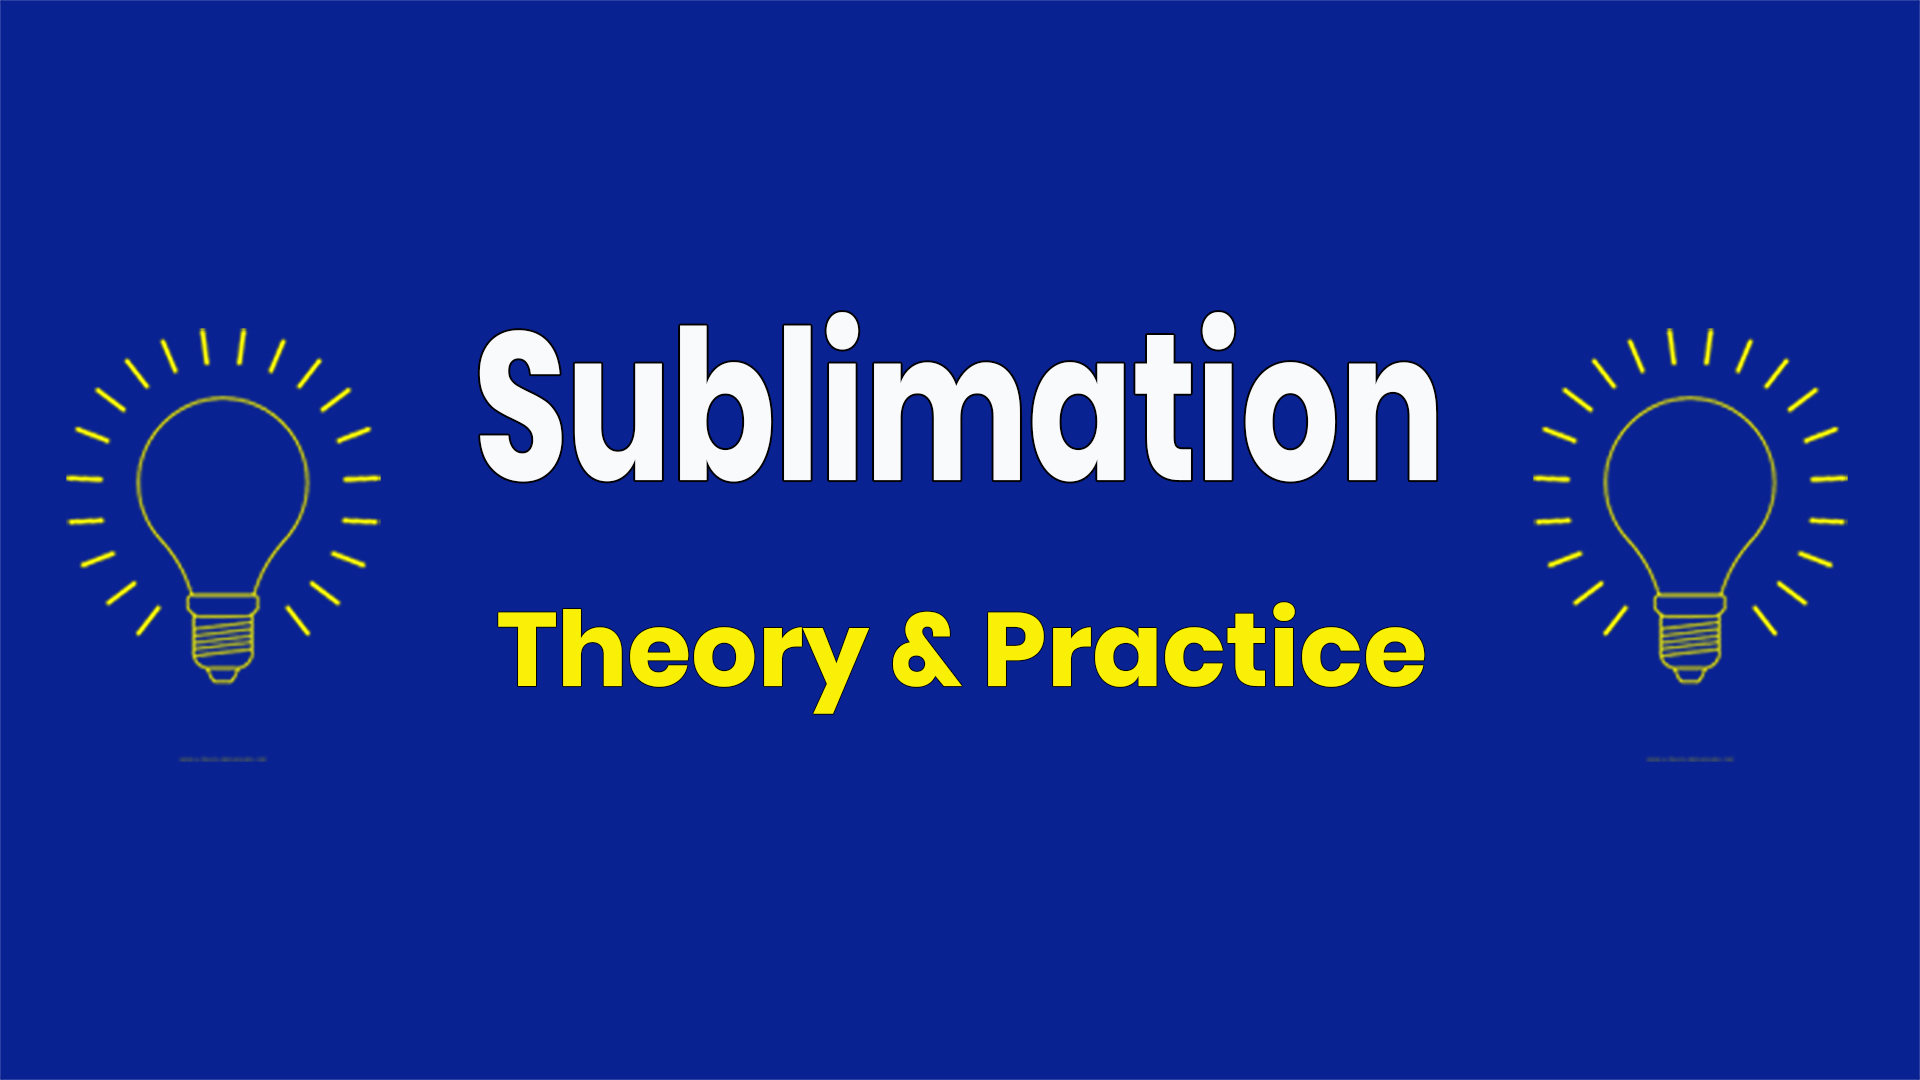 Sublimation Course – Learning Transfer has never been easier